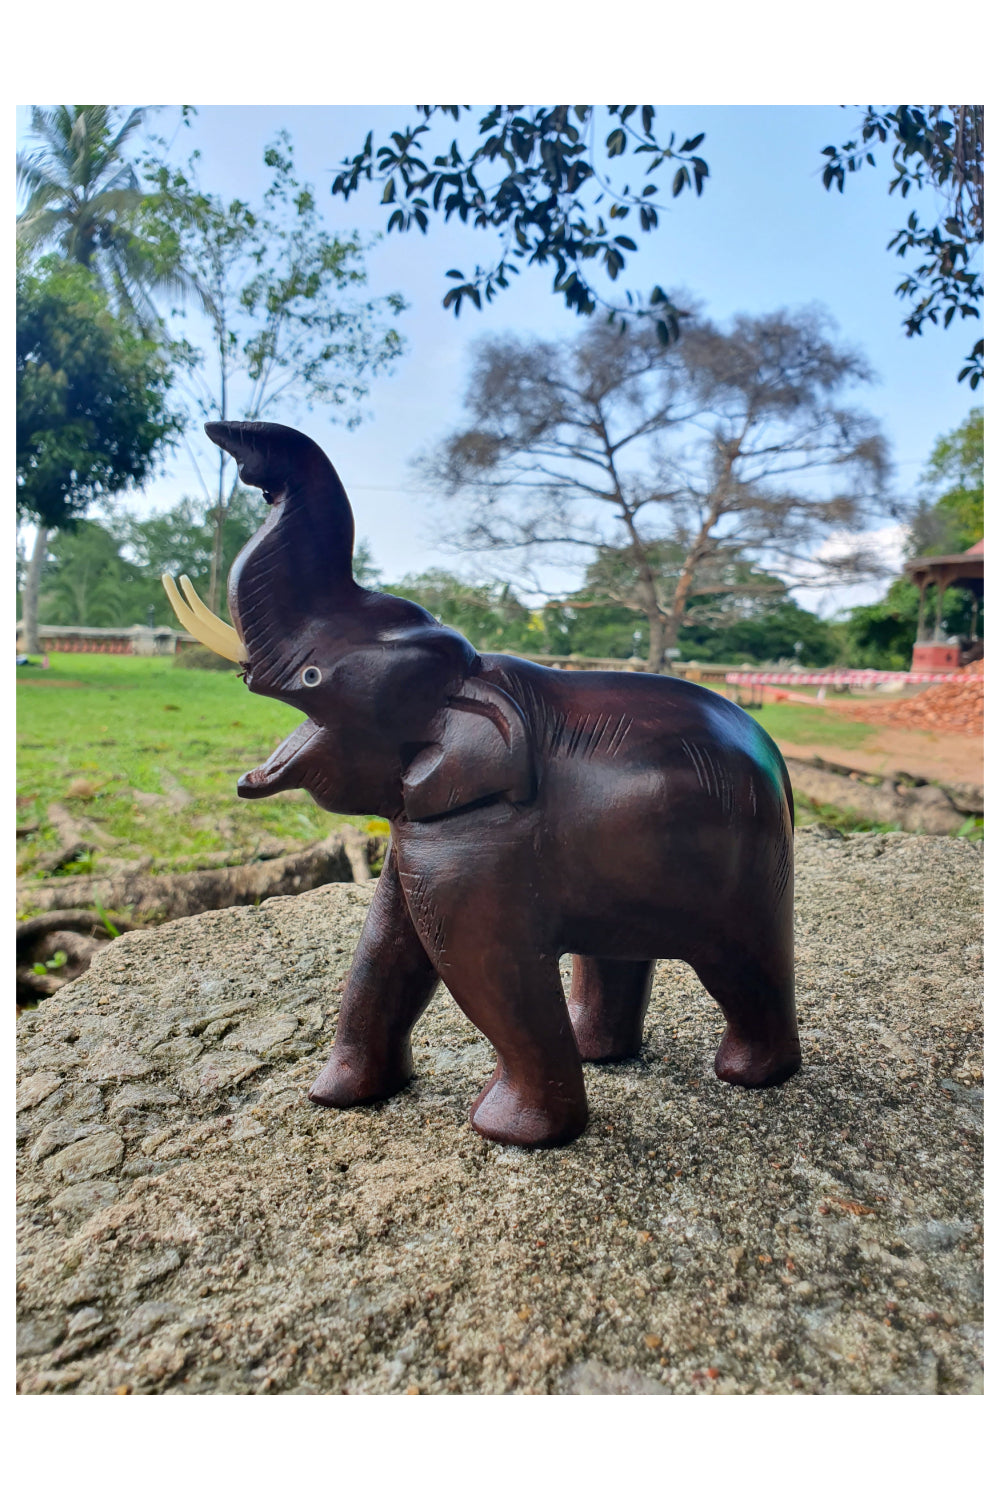 Southloom Handmade Trumpeting Elephant Handicraft (Carved from Rose Wood) 6 Inches